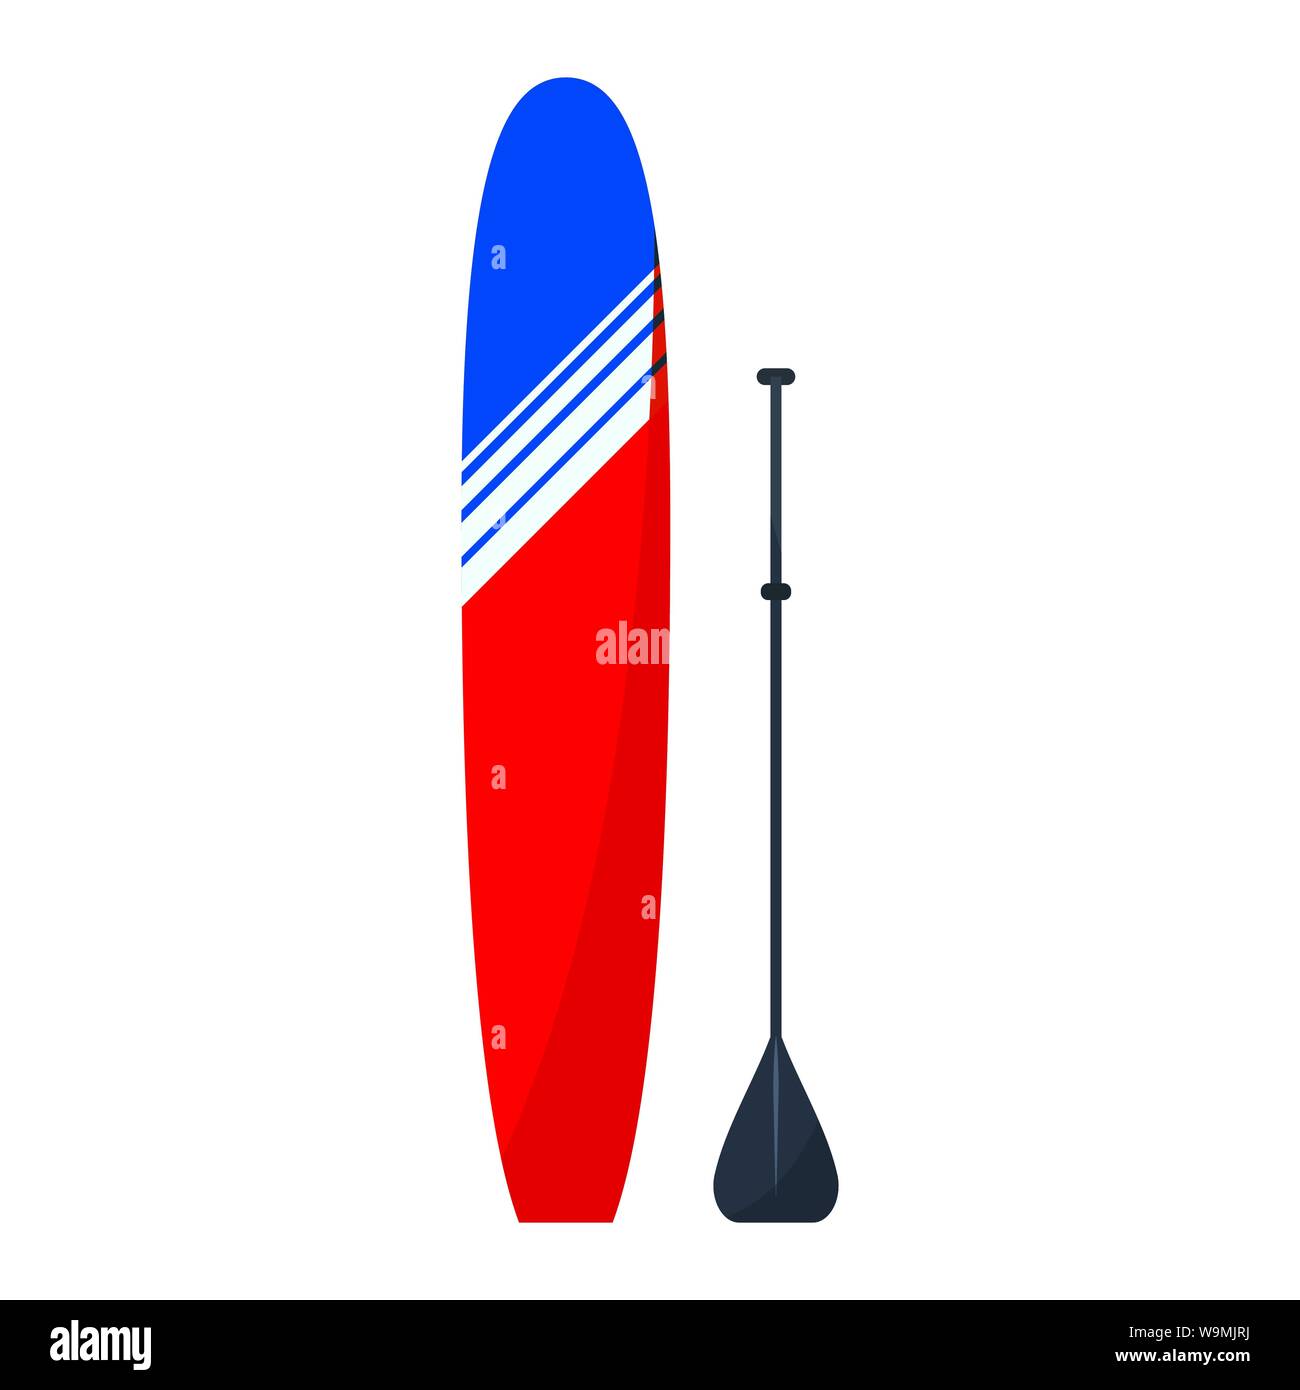 Isolated on white background flat style red and blue standup surfboard for paddleboarding -longboard with black paddle. Stock Vector